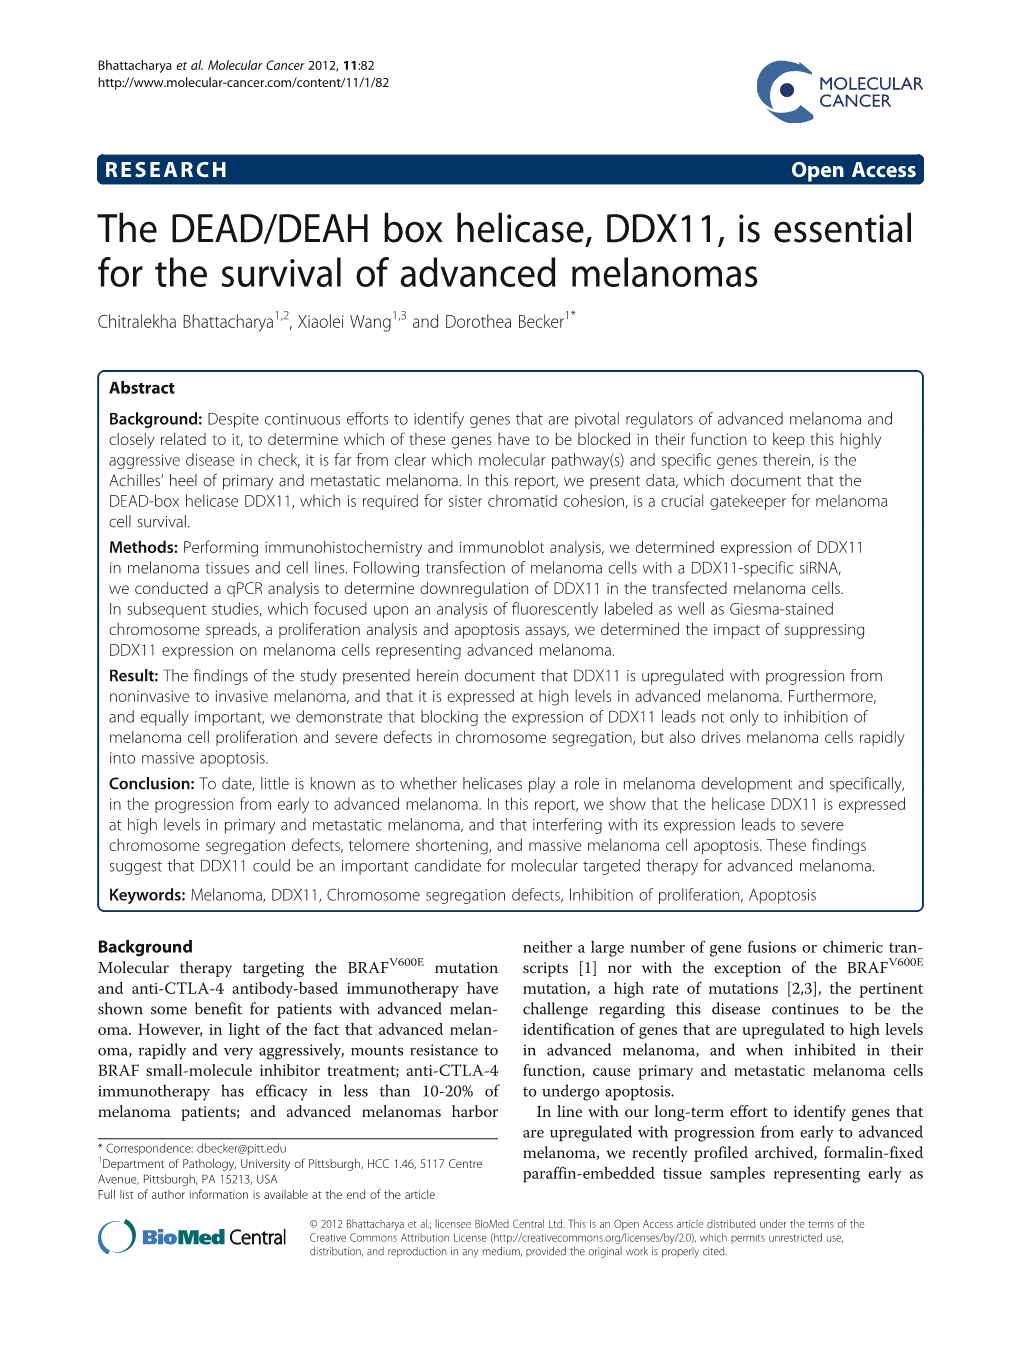 The DEAD/DEAH Box Helicase, DDX11, Is Essential for the Survival of Advanced Melanomas Chitralekha Bhattacharya1,2, Xiaolei Wang1,3 and Dorothea Becker1*